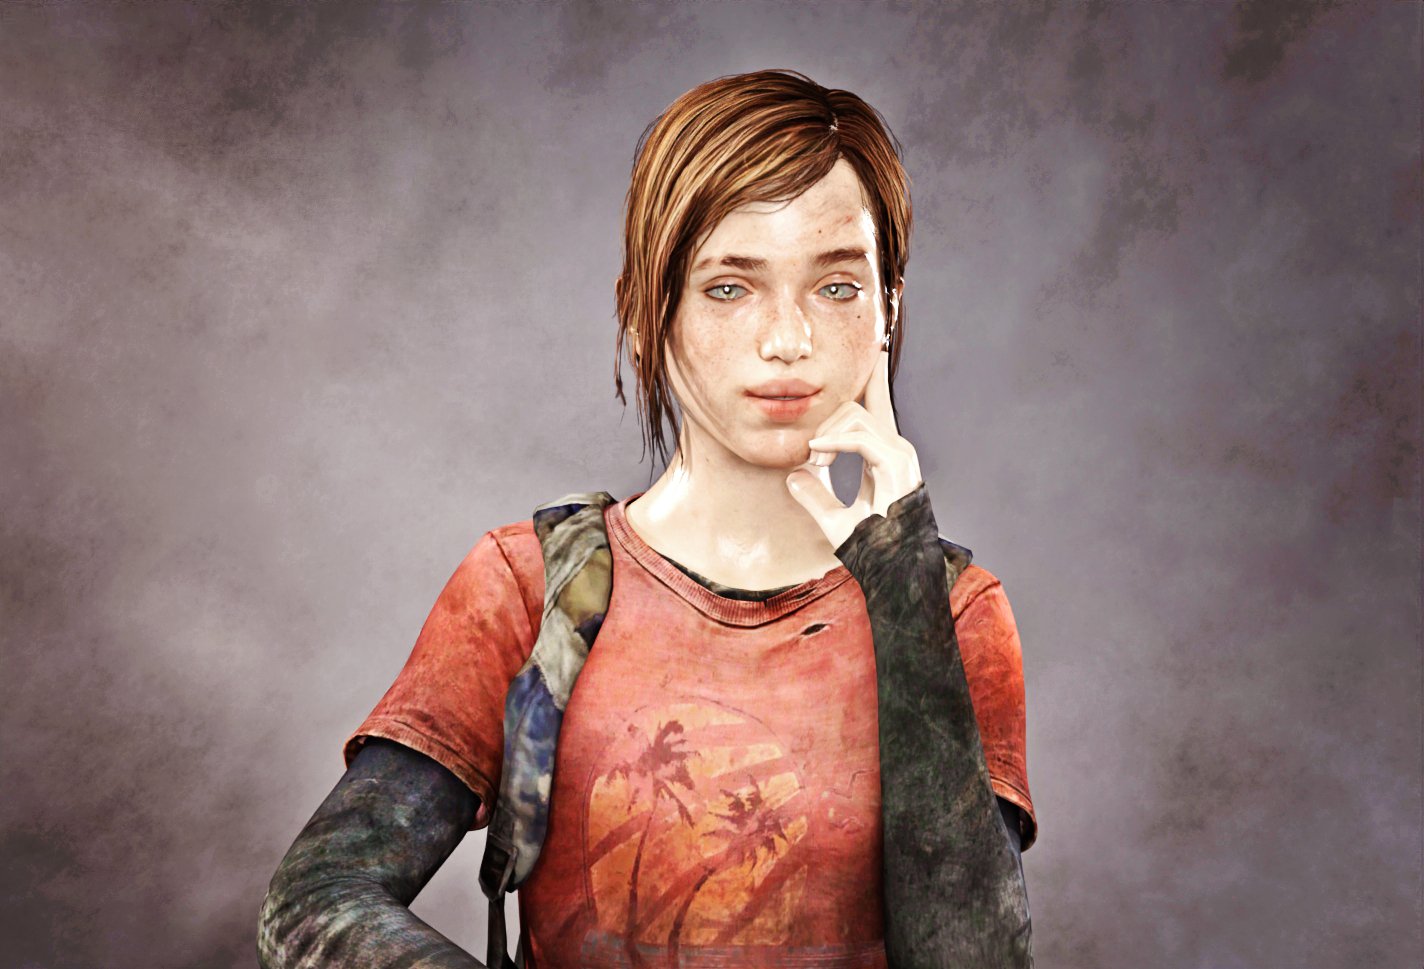 Ellie from The Last of Us For Genesis 8 Female - Daz Content by RyonaComics